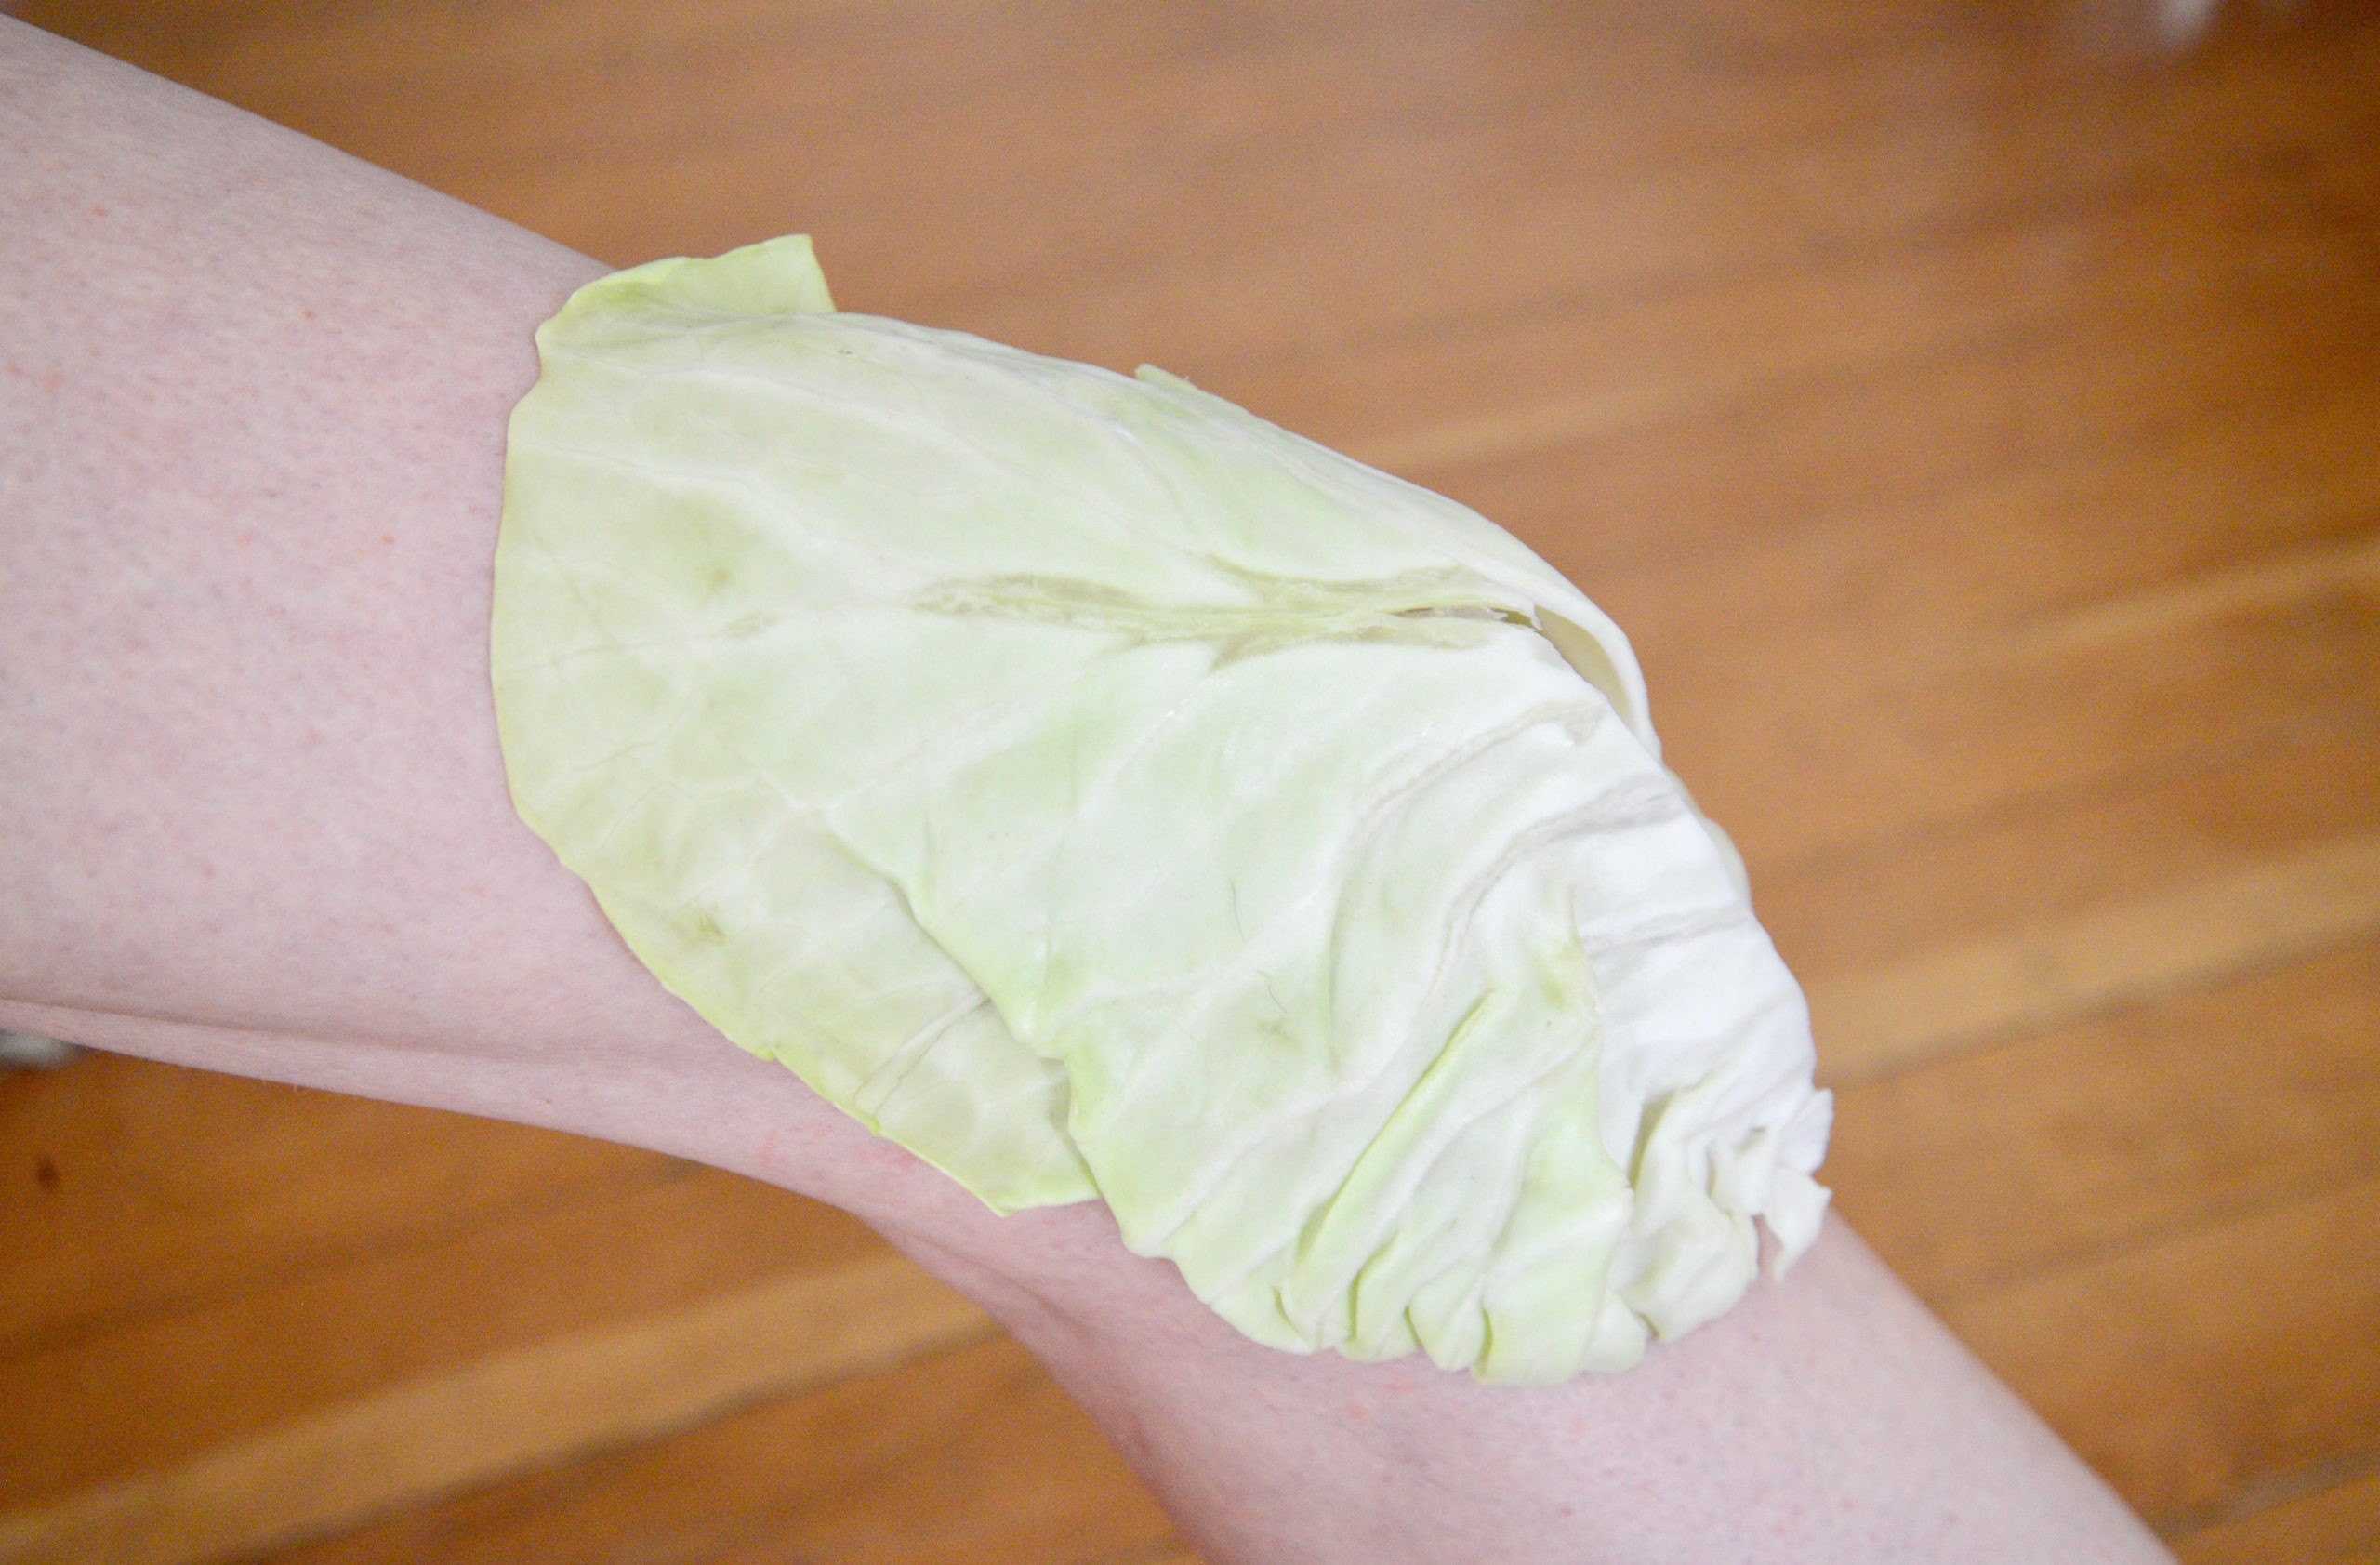 cabbage leaf on knee joint